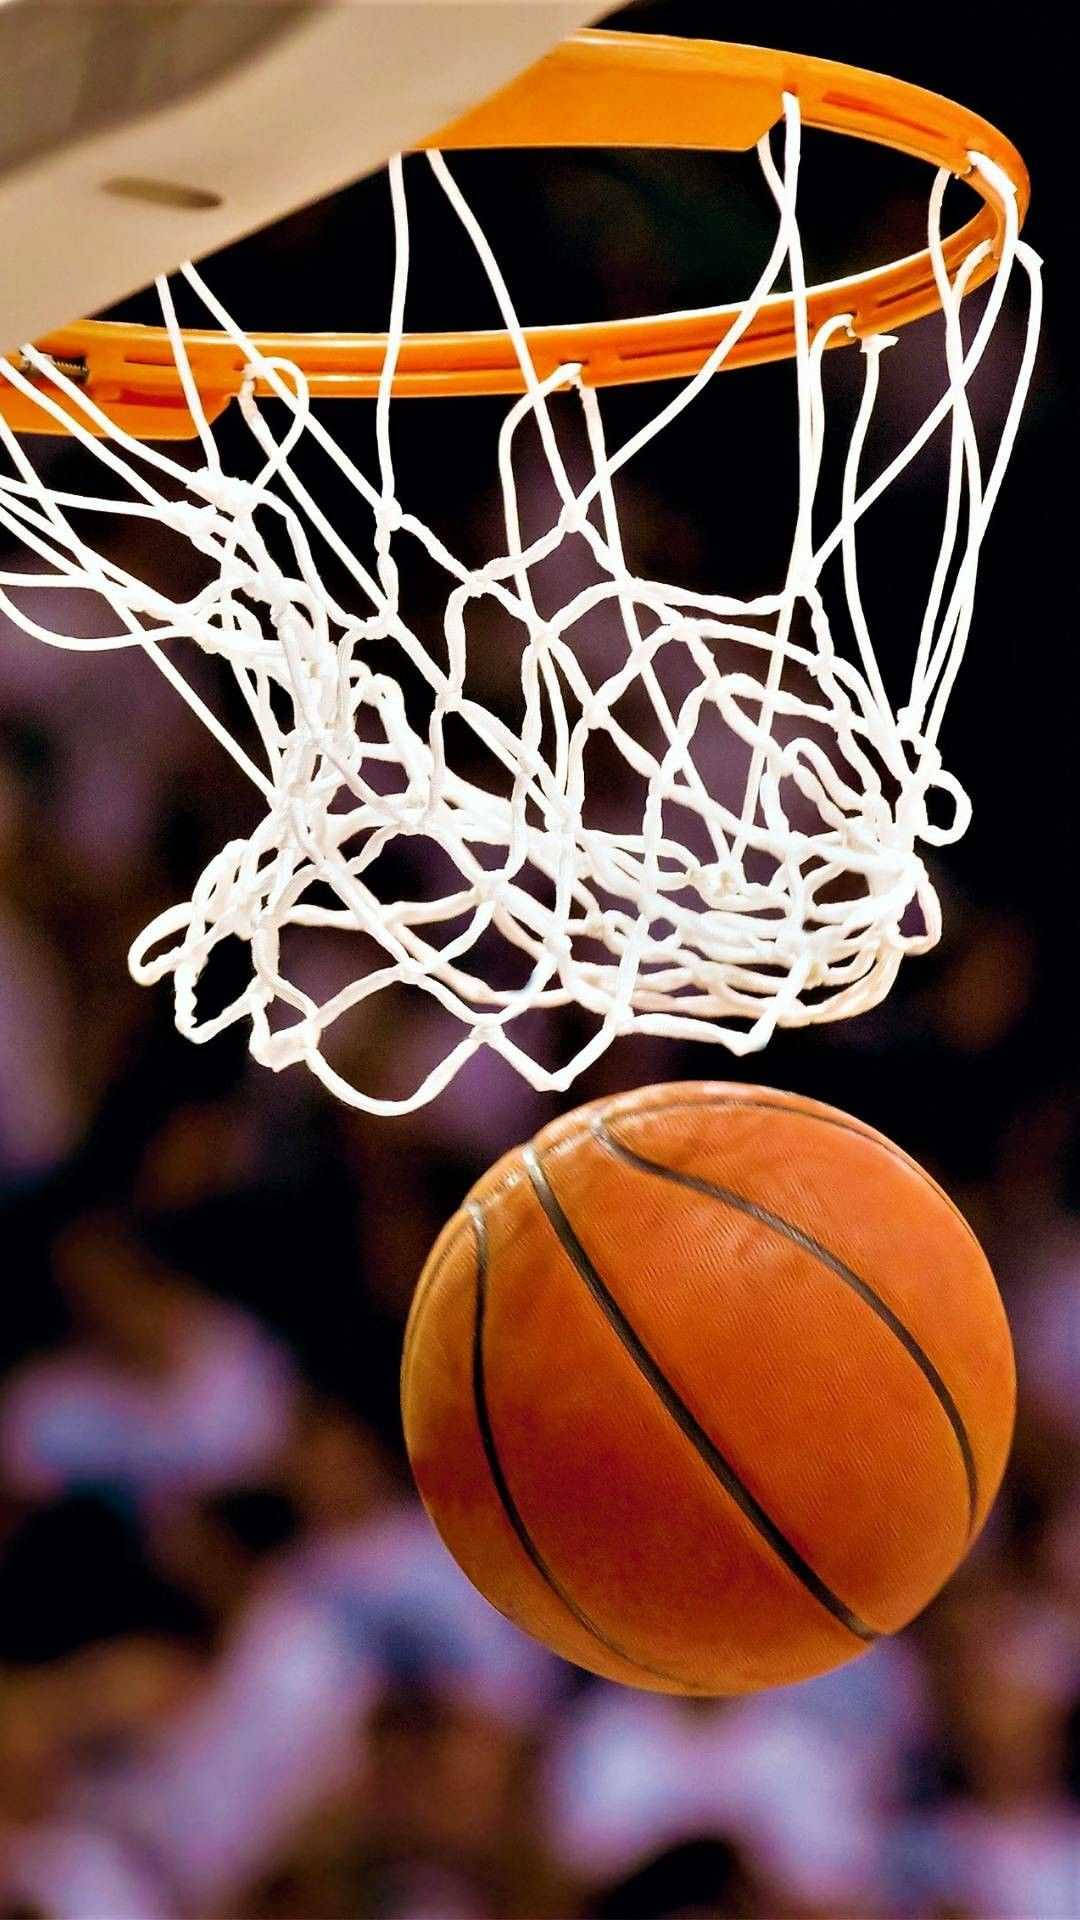 Shoot Ring Cool Basketball Iphone Background